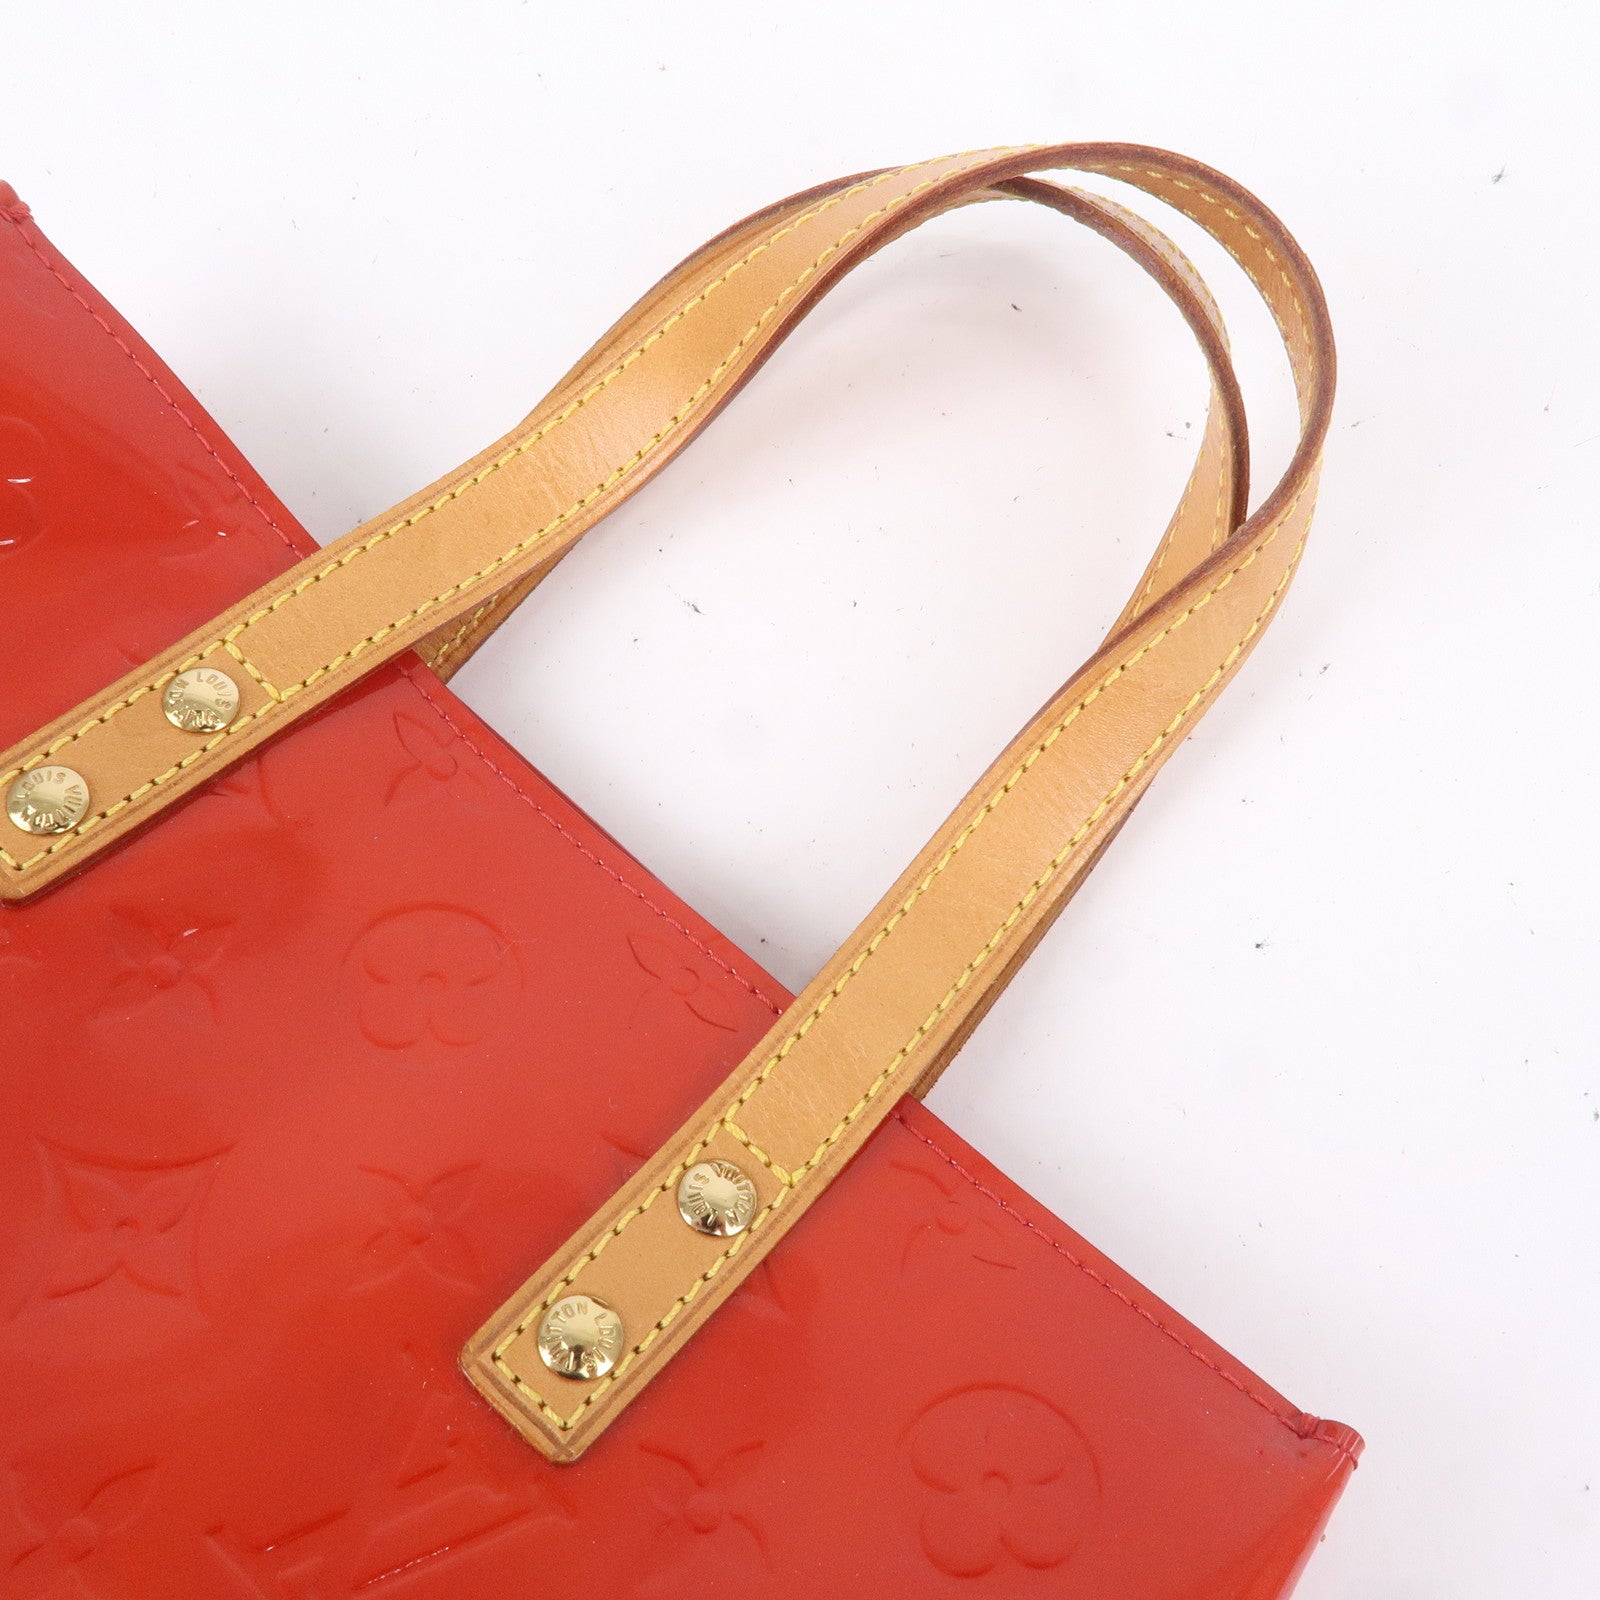 small red louis vuitton bag